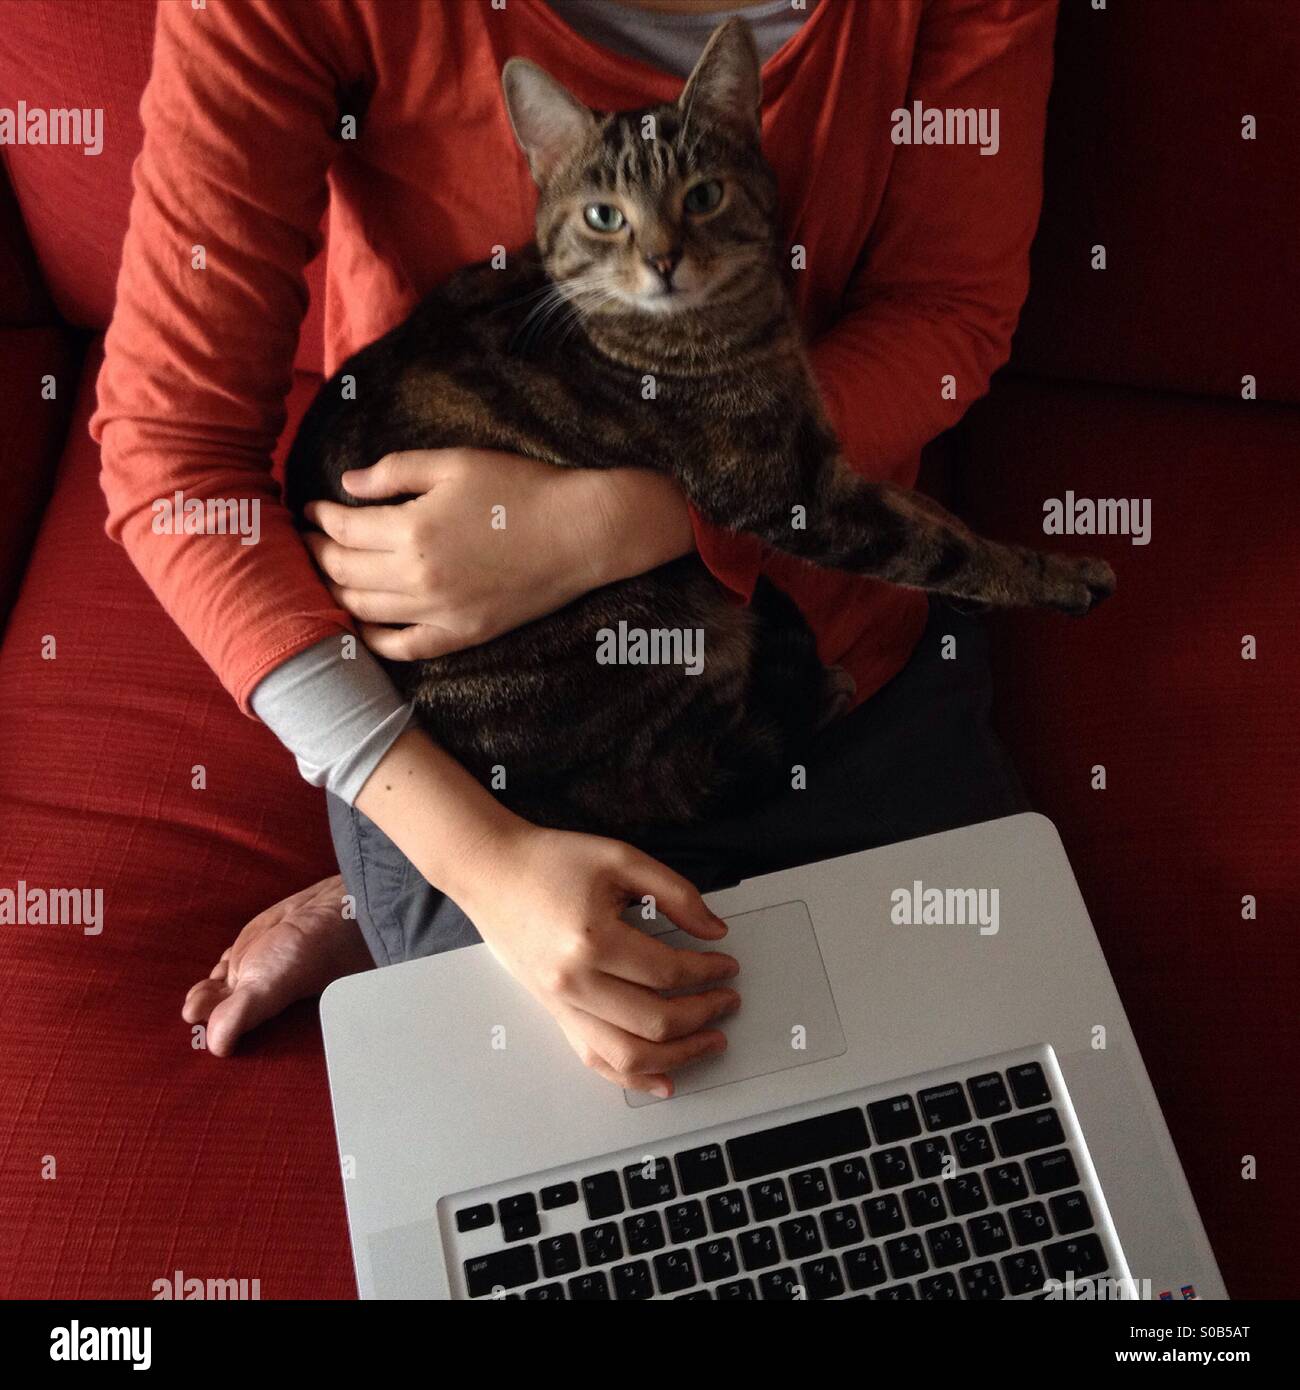 Working from home, with Apple Mac laptop, and cat. Stock Photo